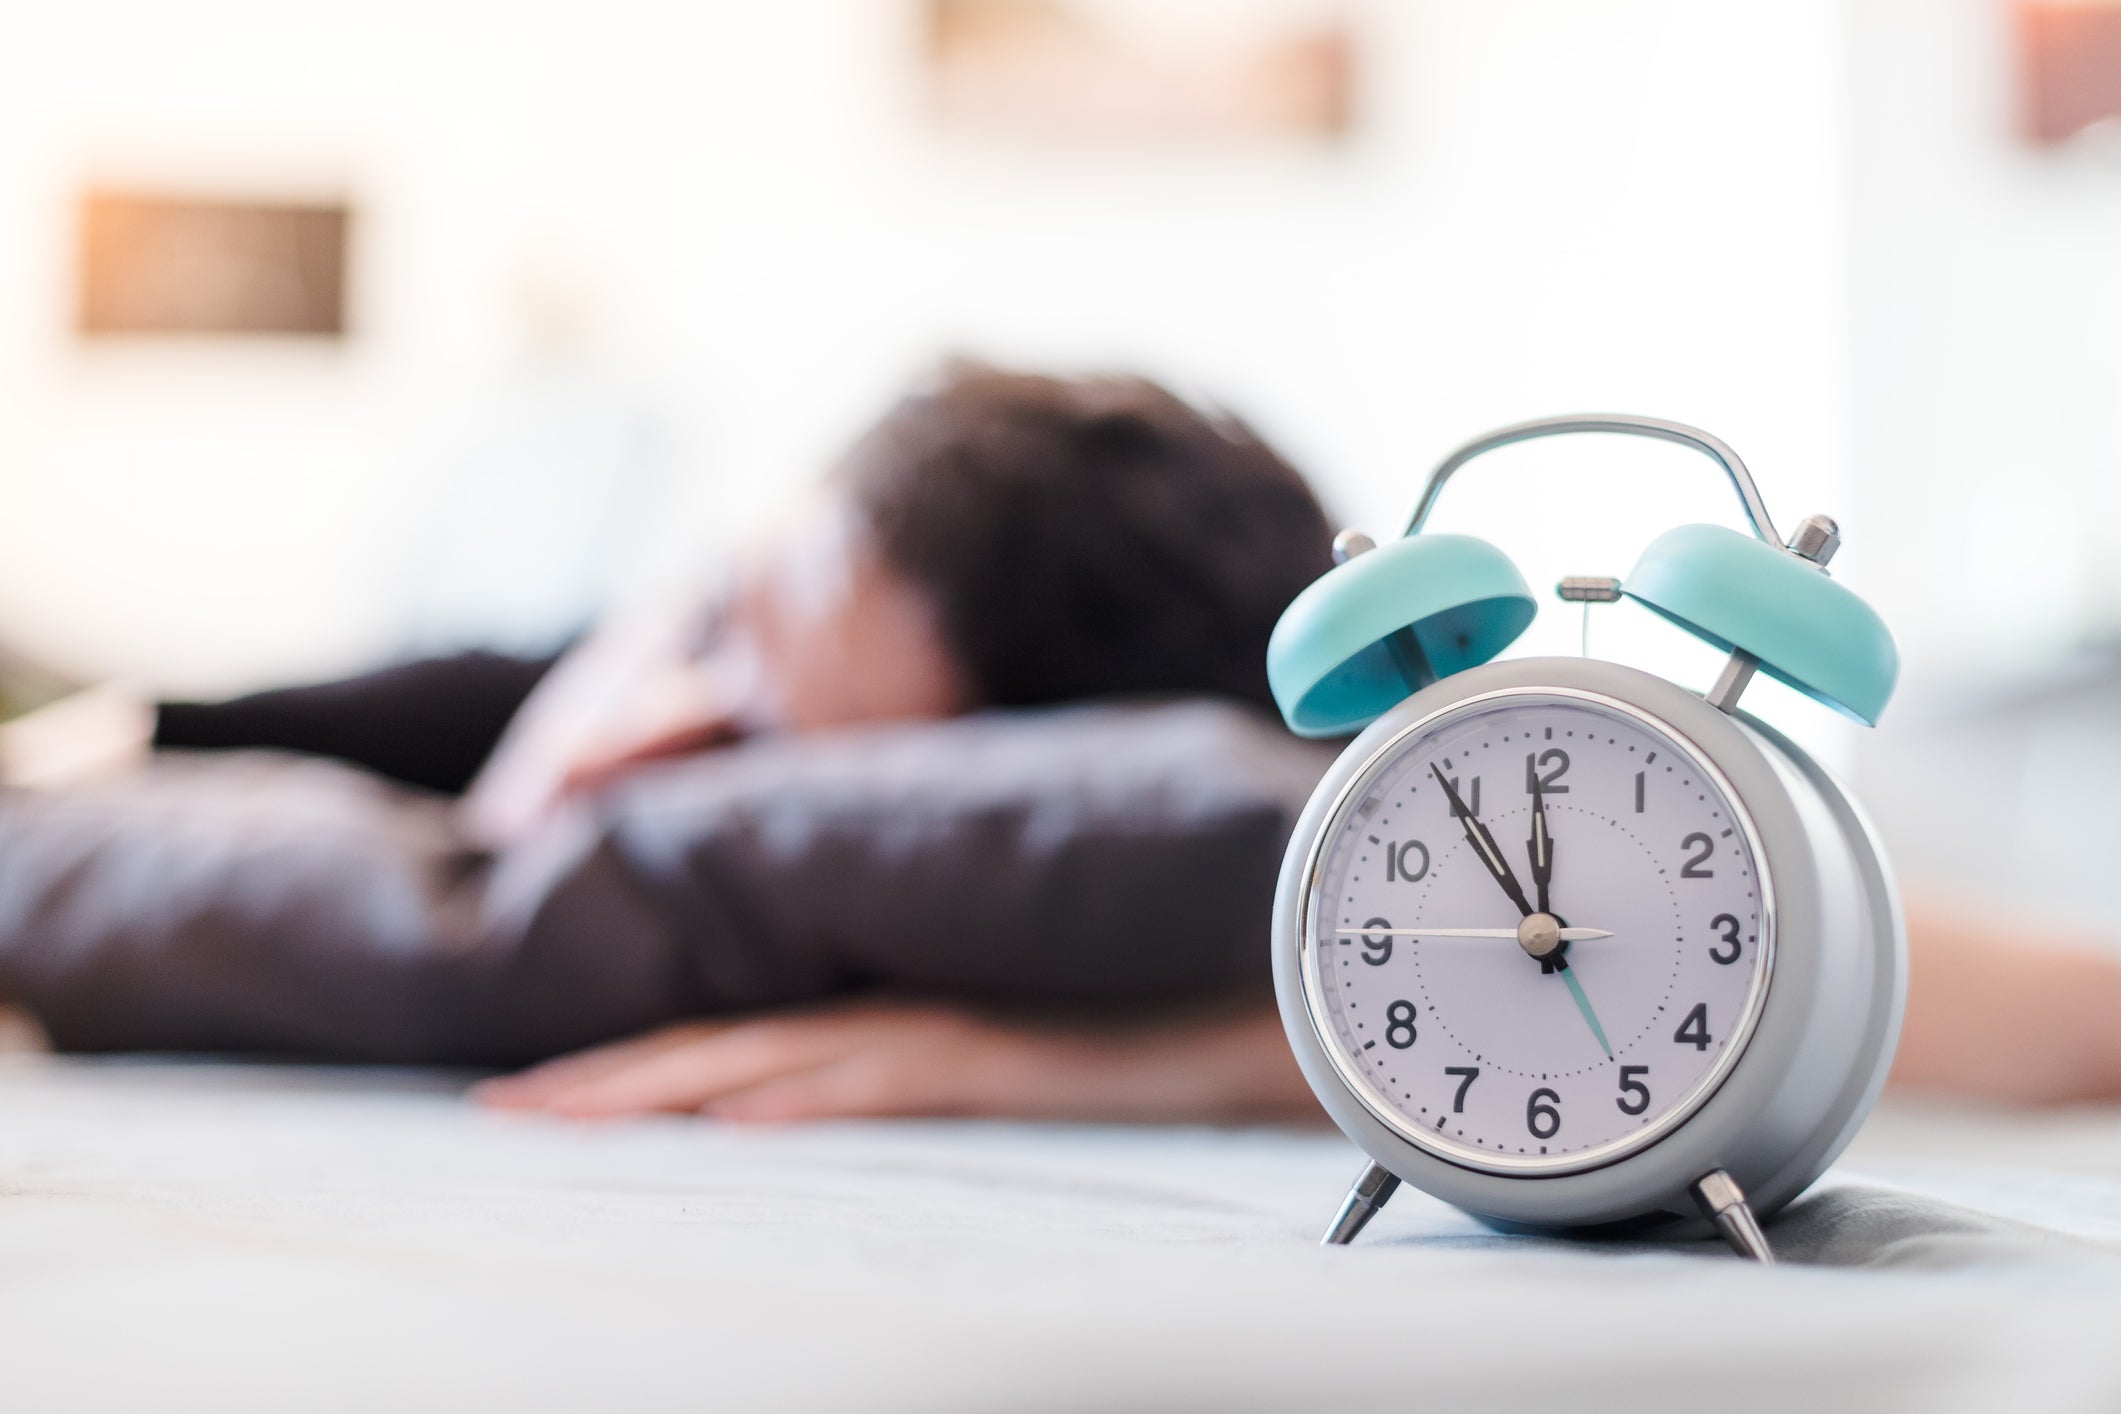 It can be tough on our bodies when we spring forward to daylight saving time. A ˽̳ Davis Health sleep expert offers strategies to help you adjust. Man shown sleeping behind the face of an alarm clock.